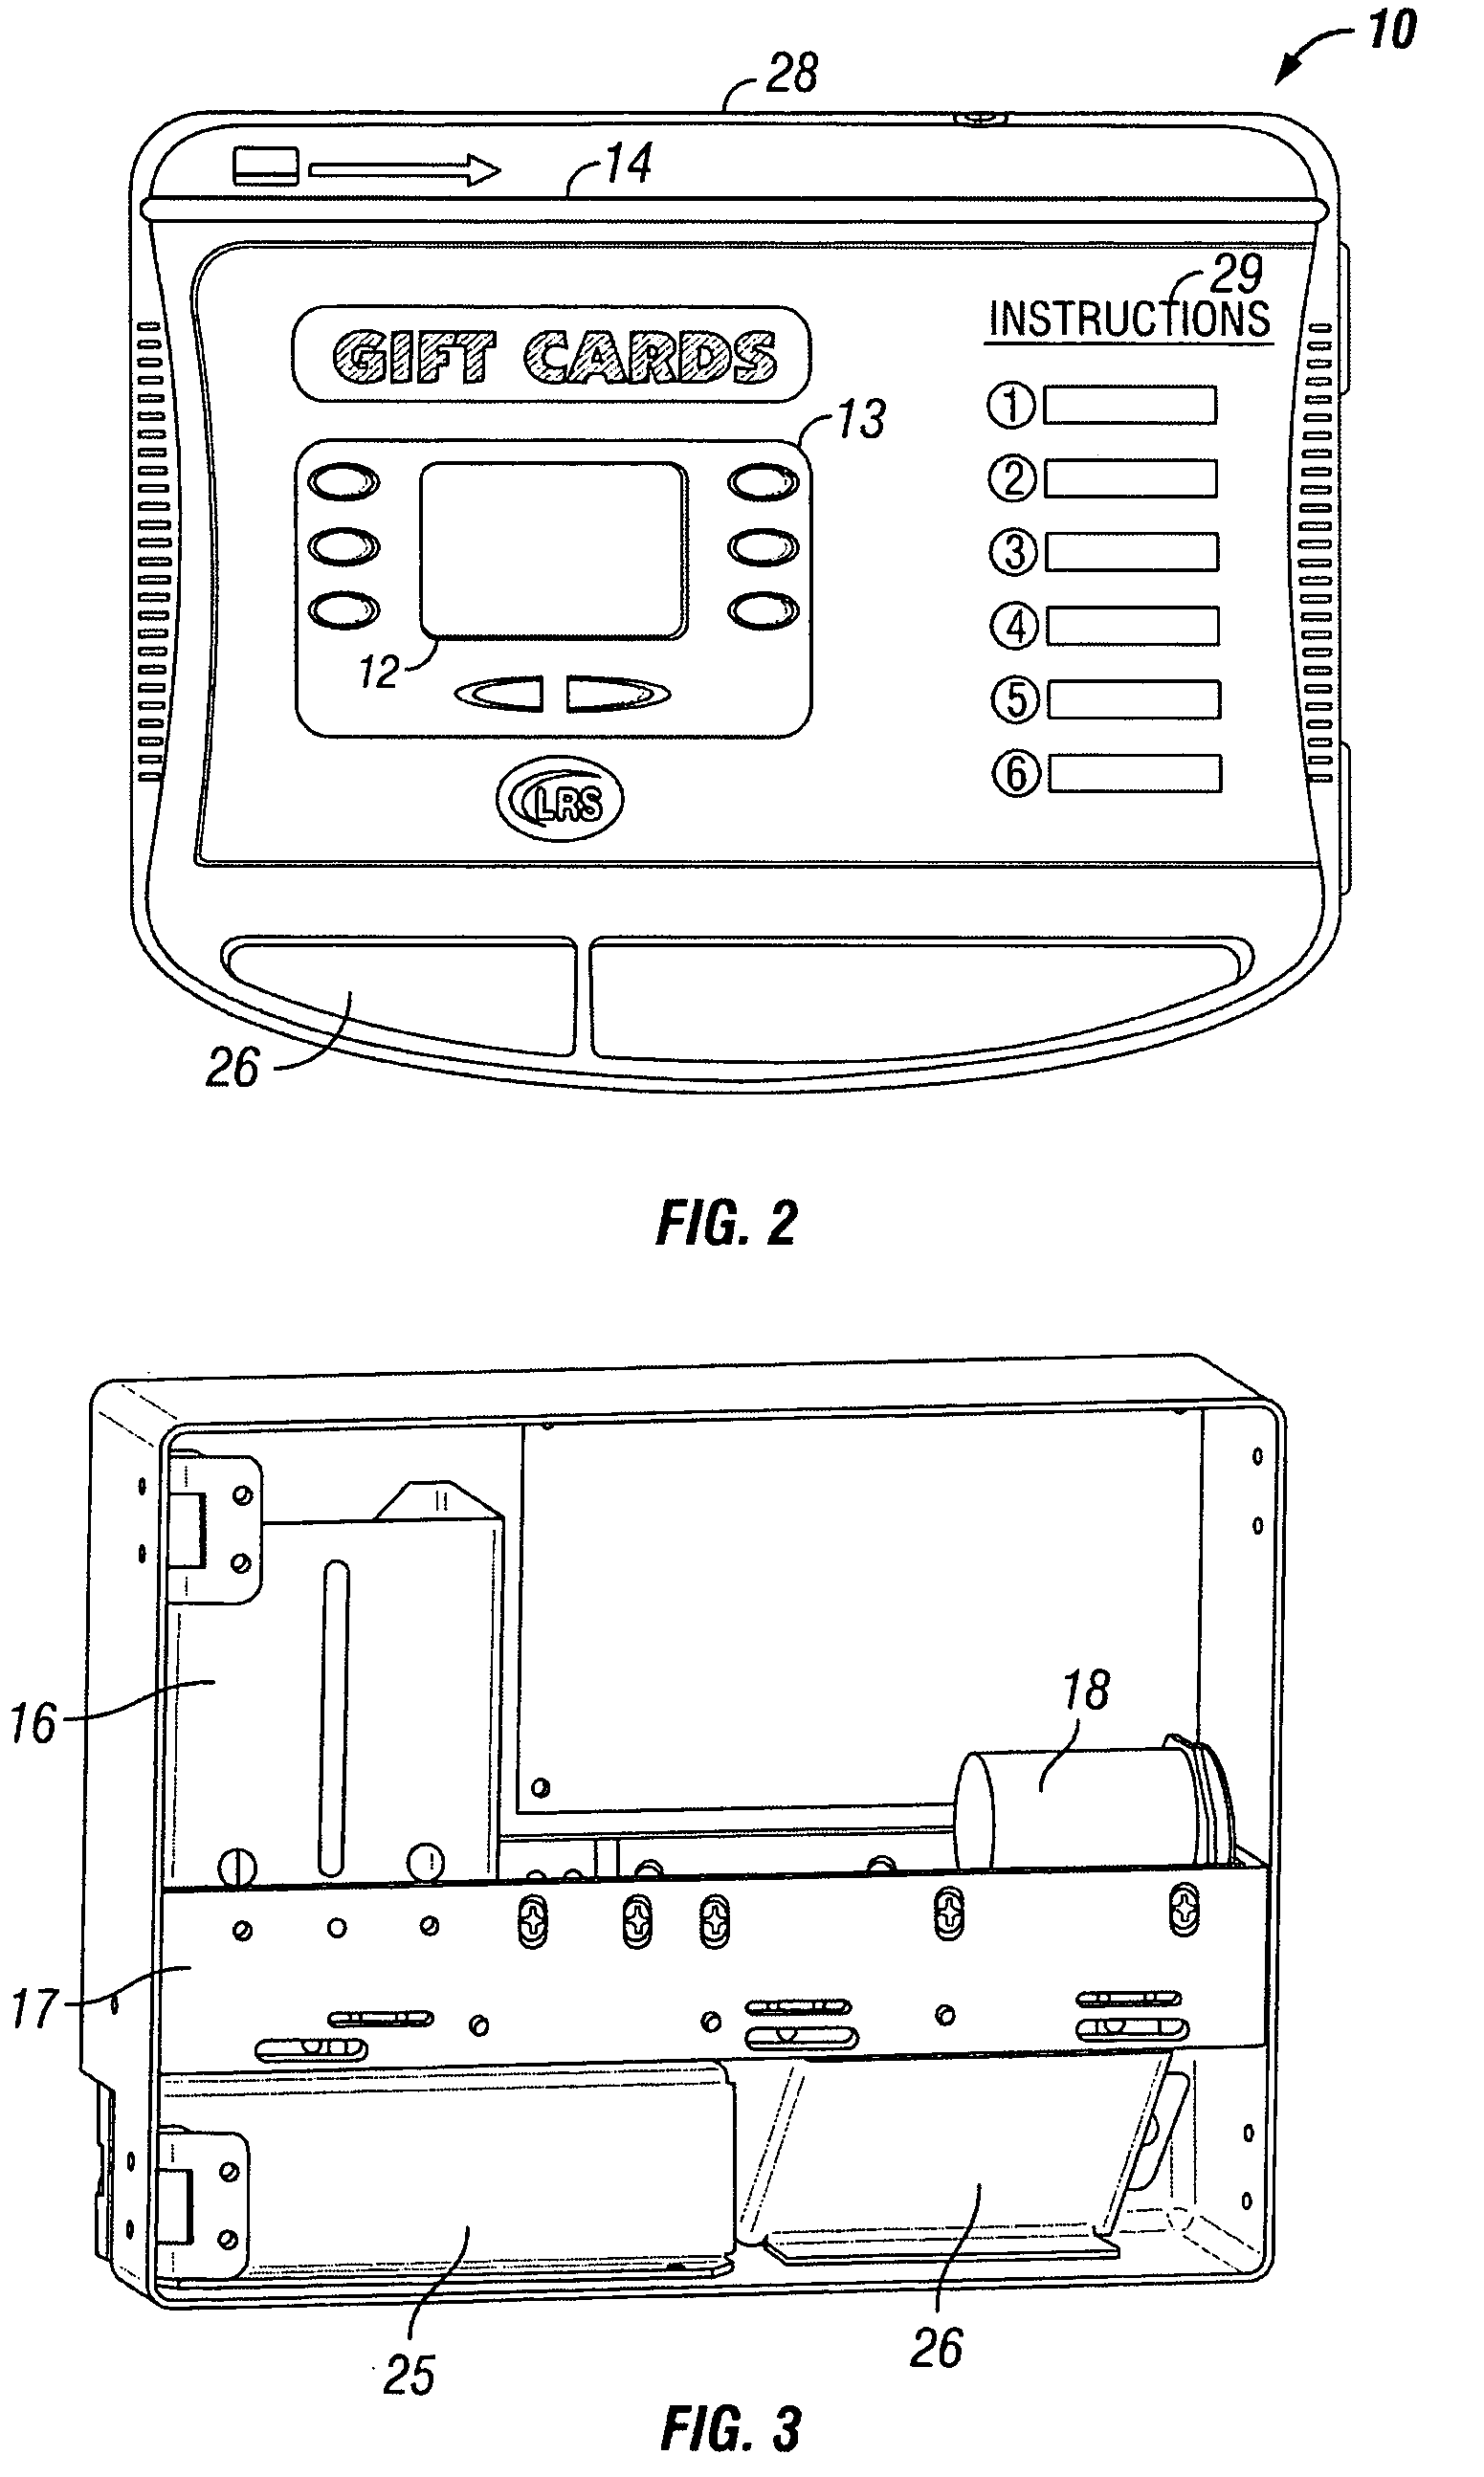 Method and apparatus for generating and dispensing gift cards